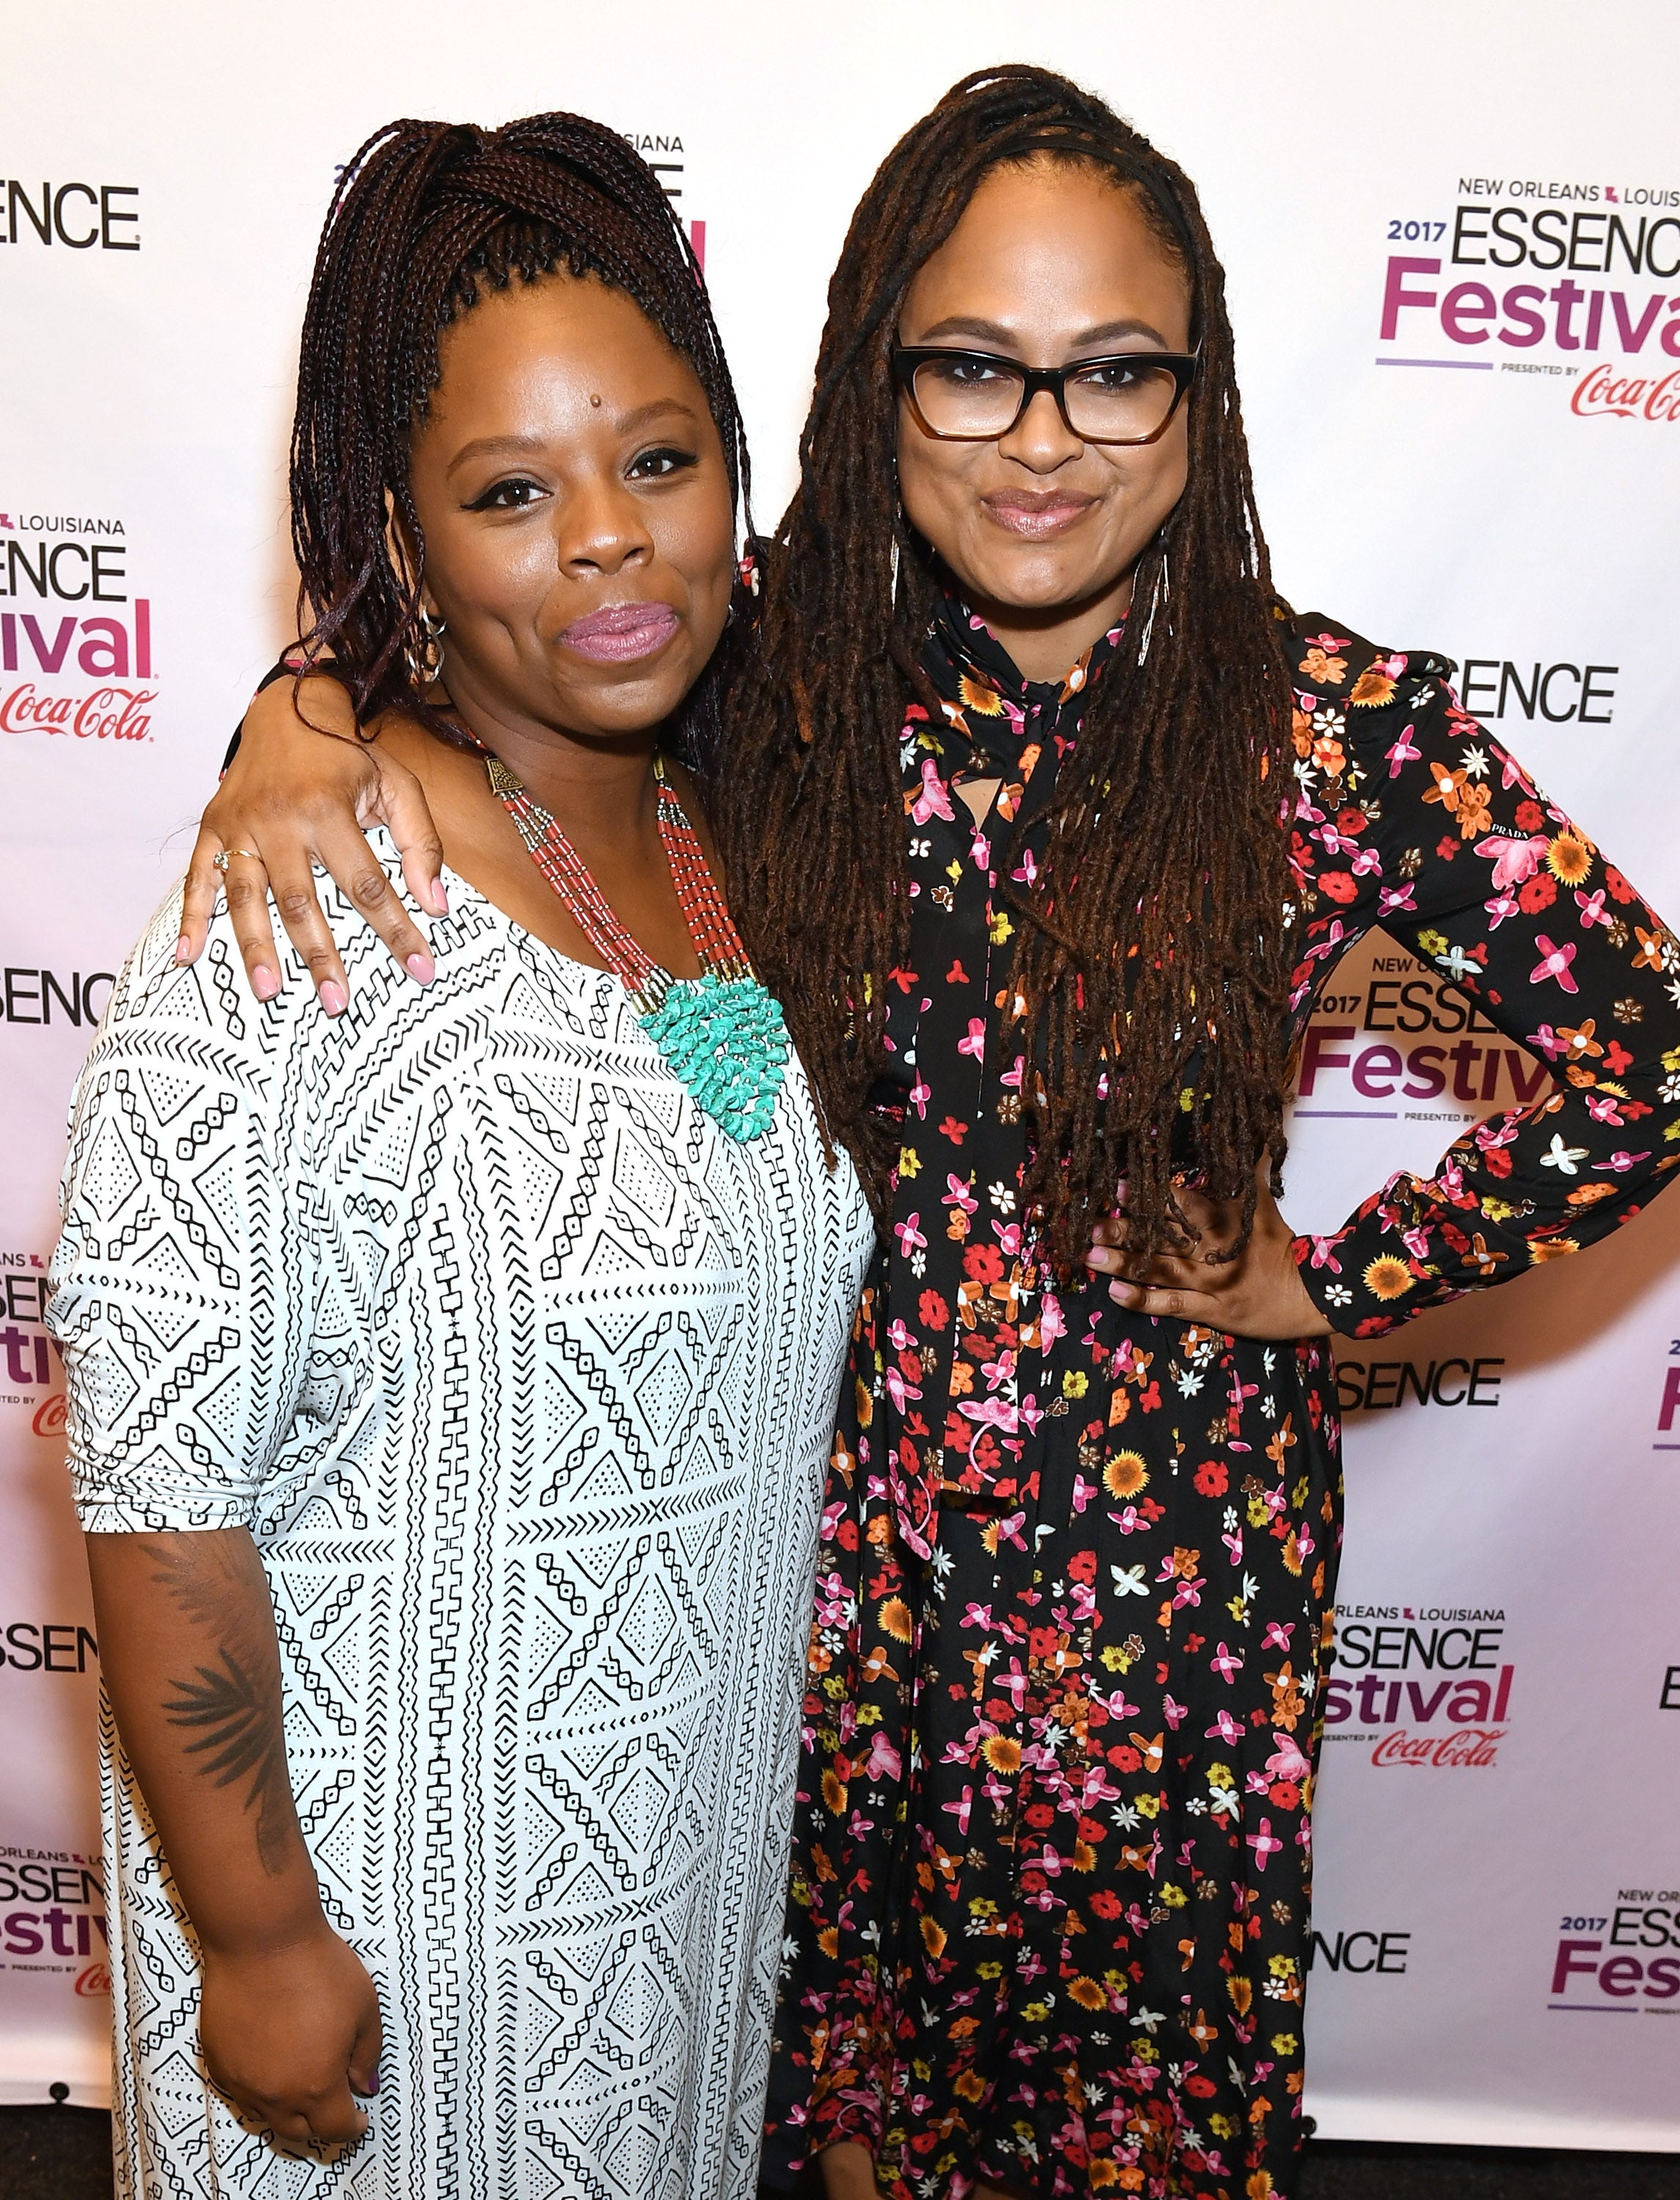 The Thing That Gives Ava DuVernay And Patrisse Cullors Hope: Black People
 
